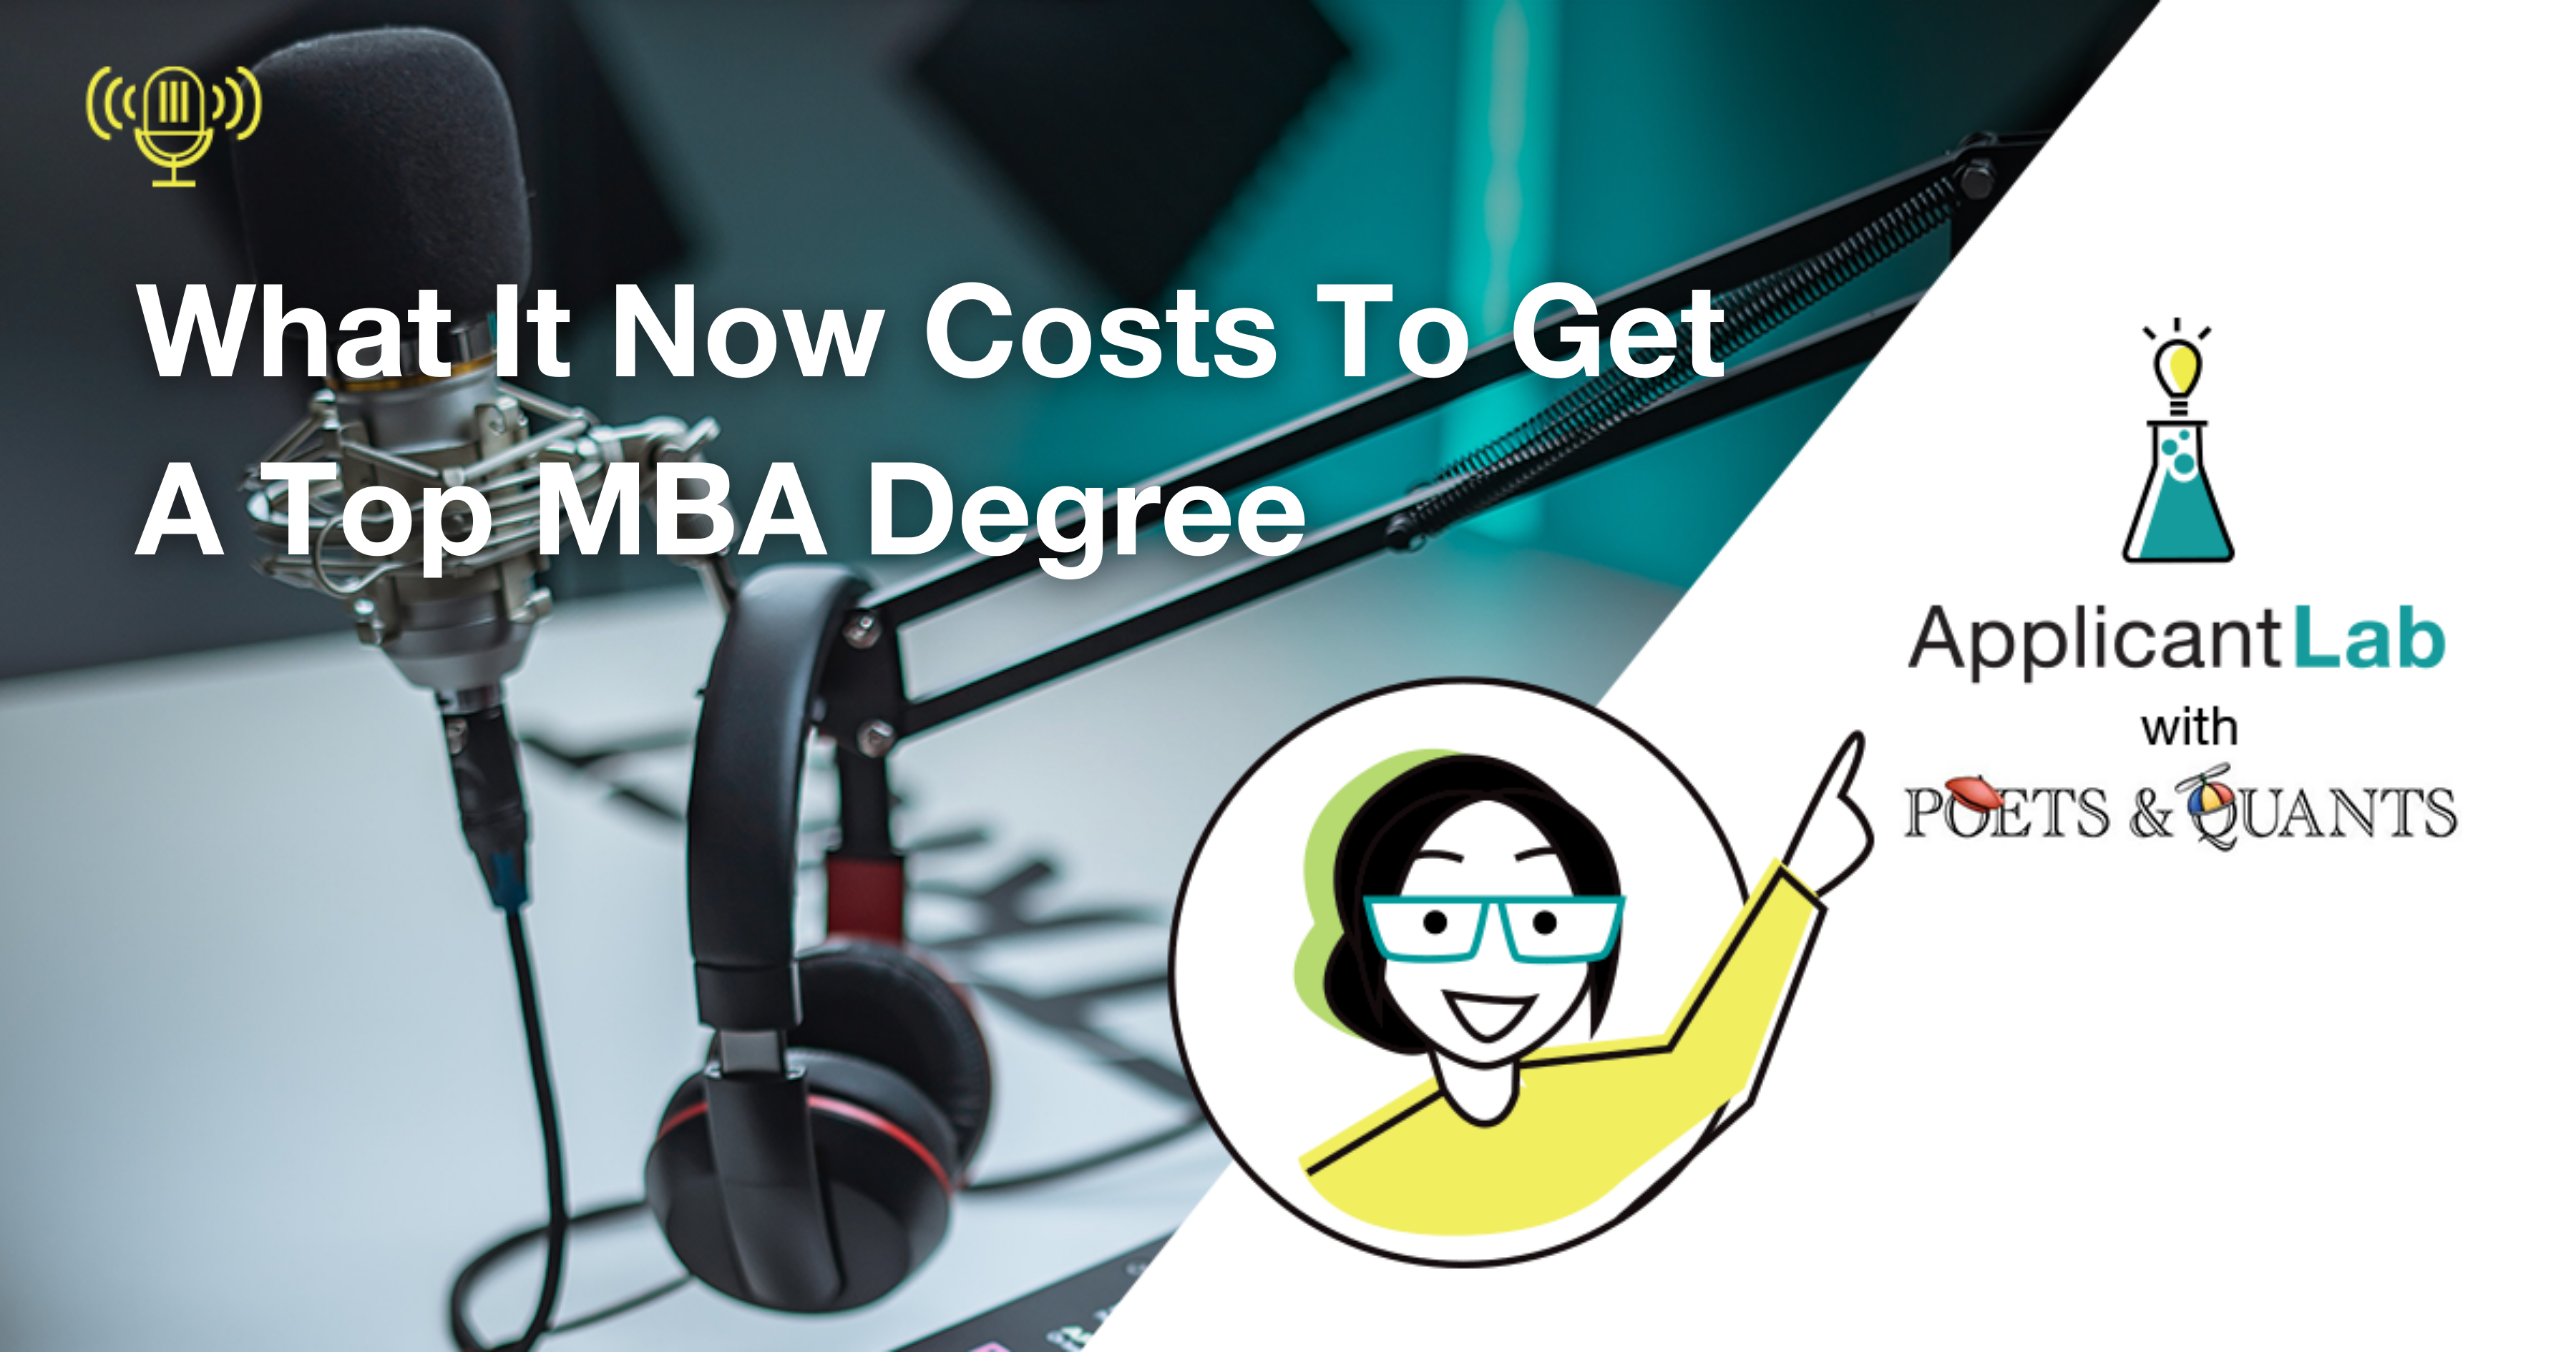 What It Now Costs To Get A Top MBA Degree